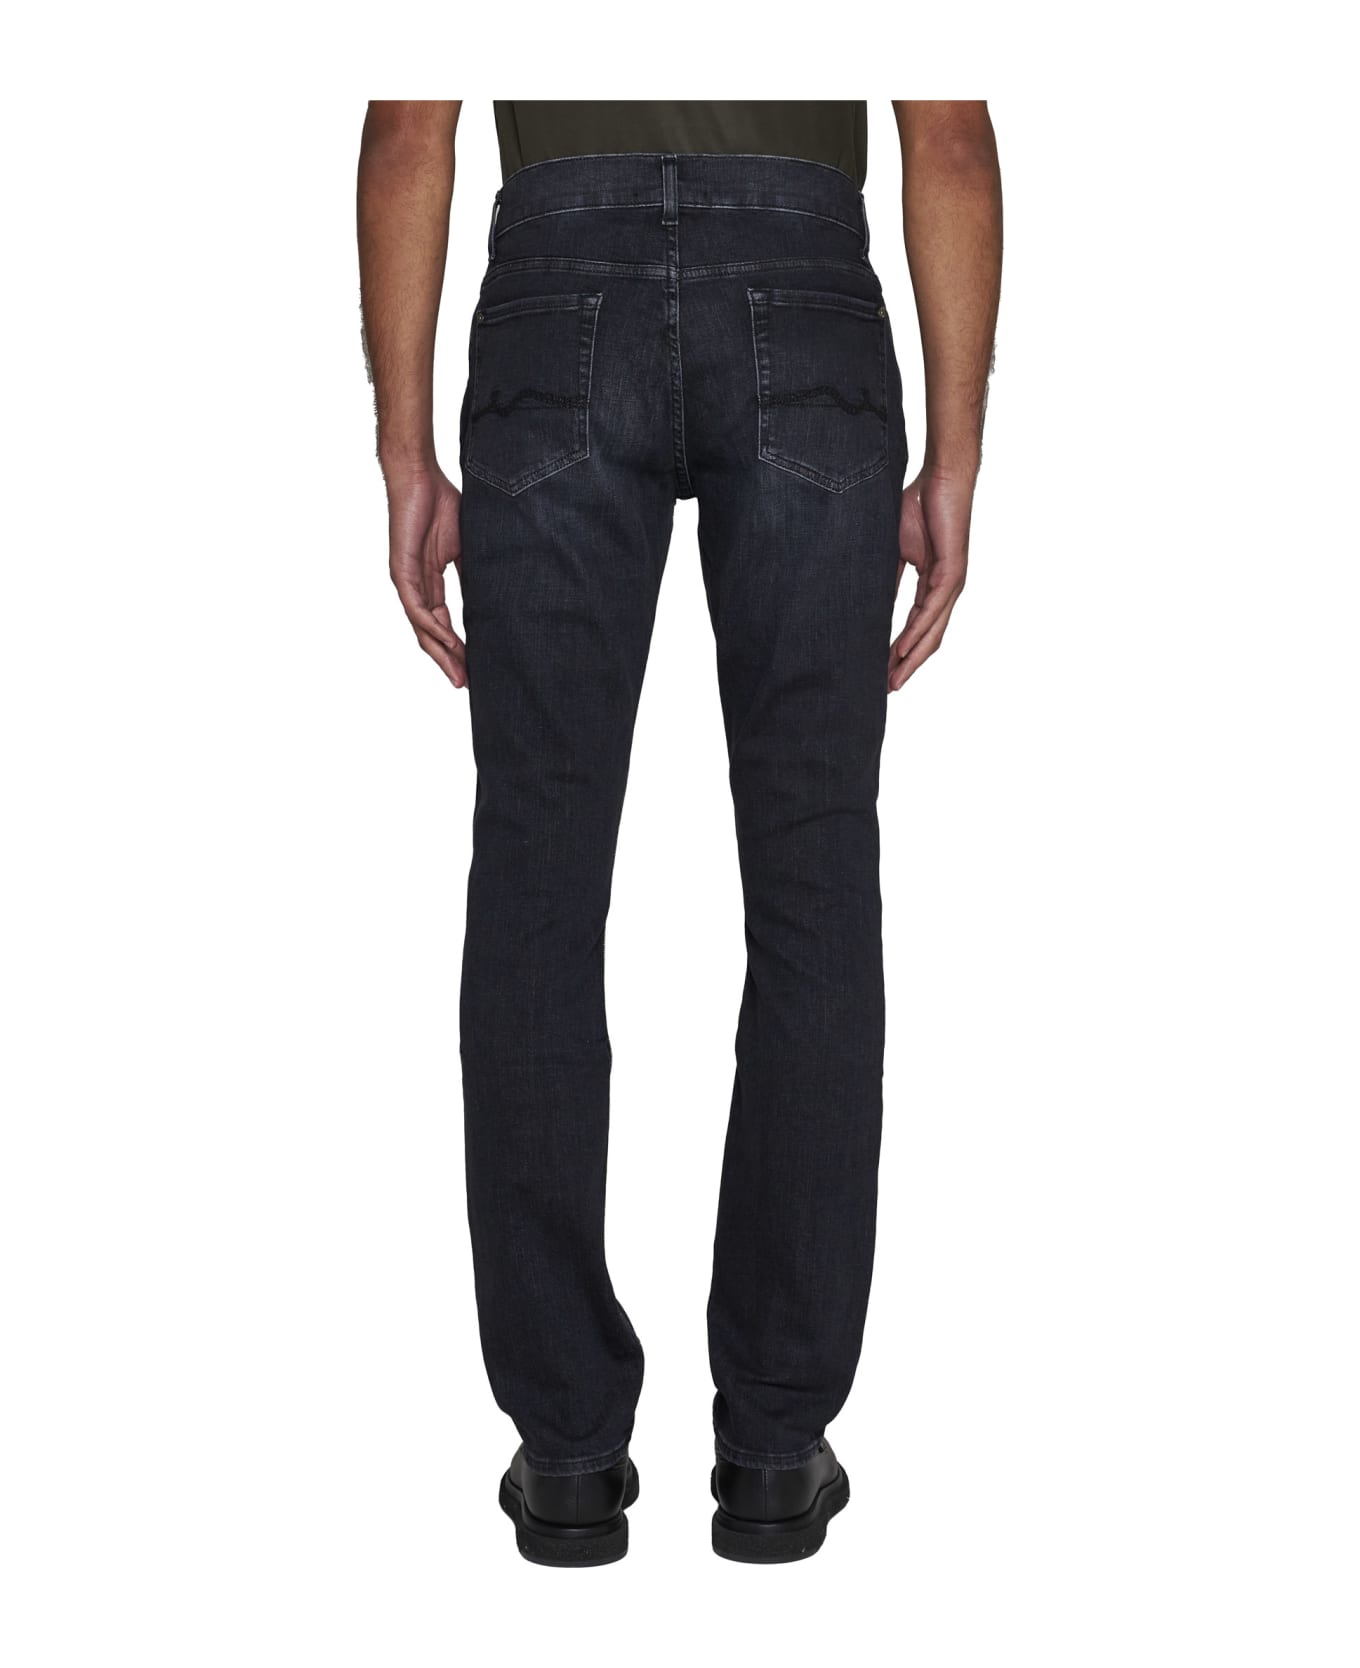 7 For All Mankind Jeans - Black デニム